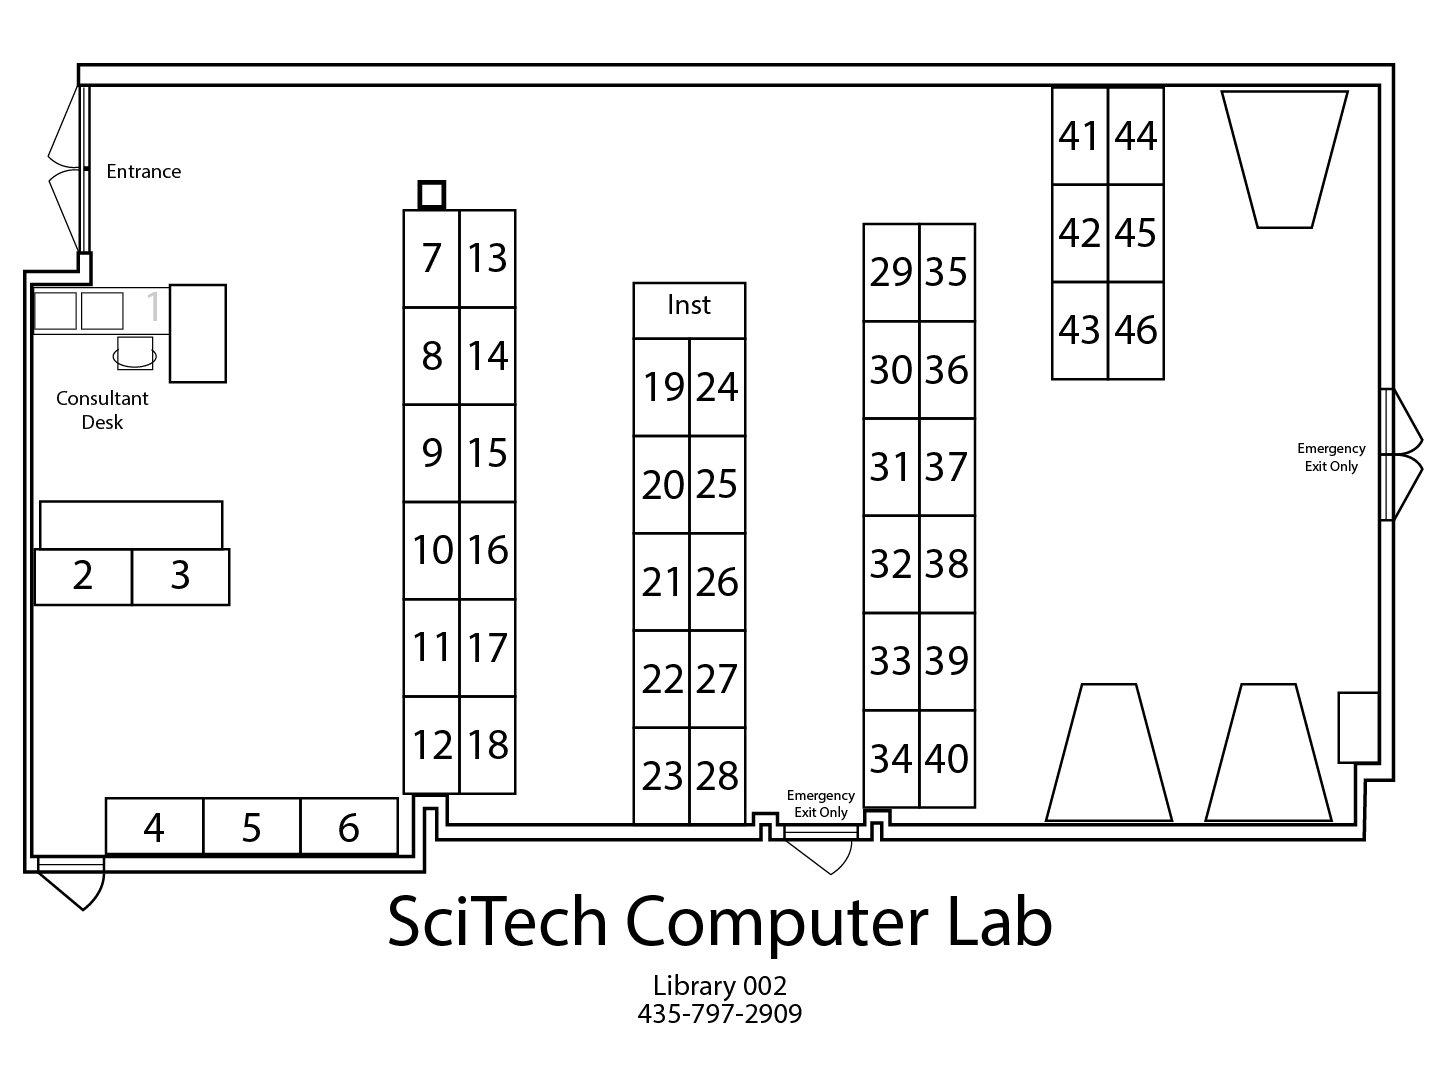 Sci-Tech Library lab map